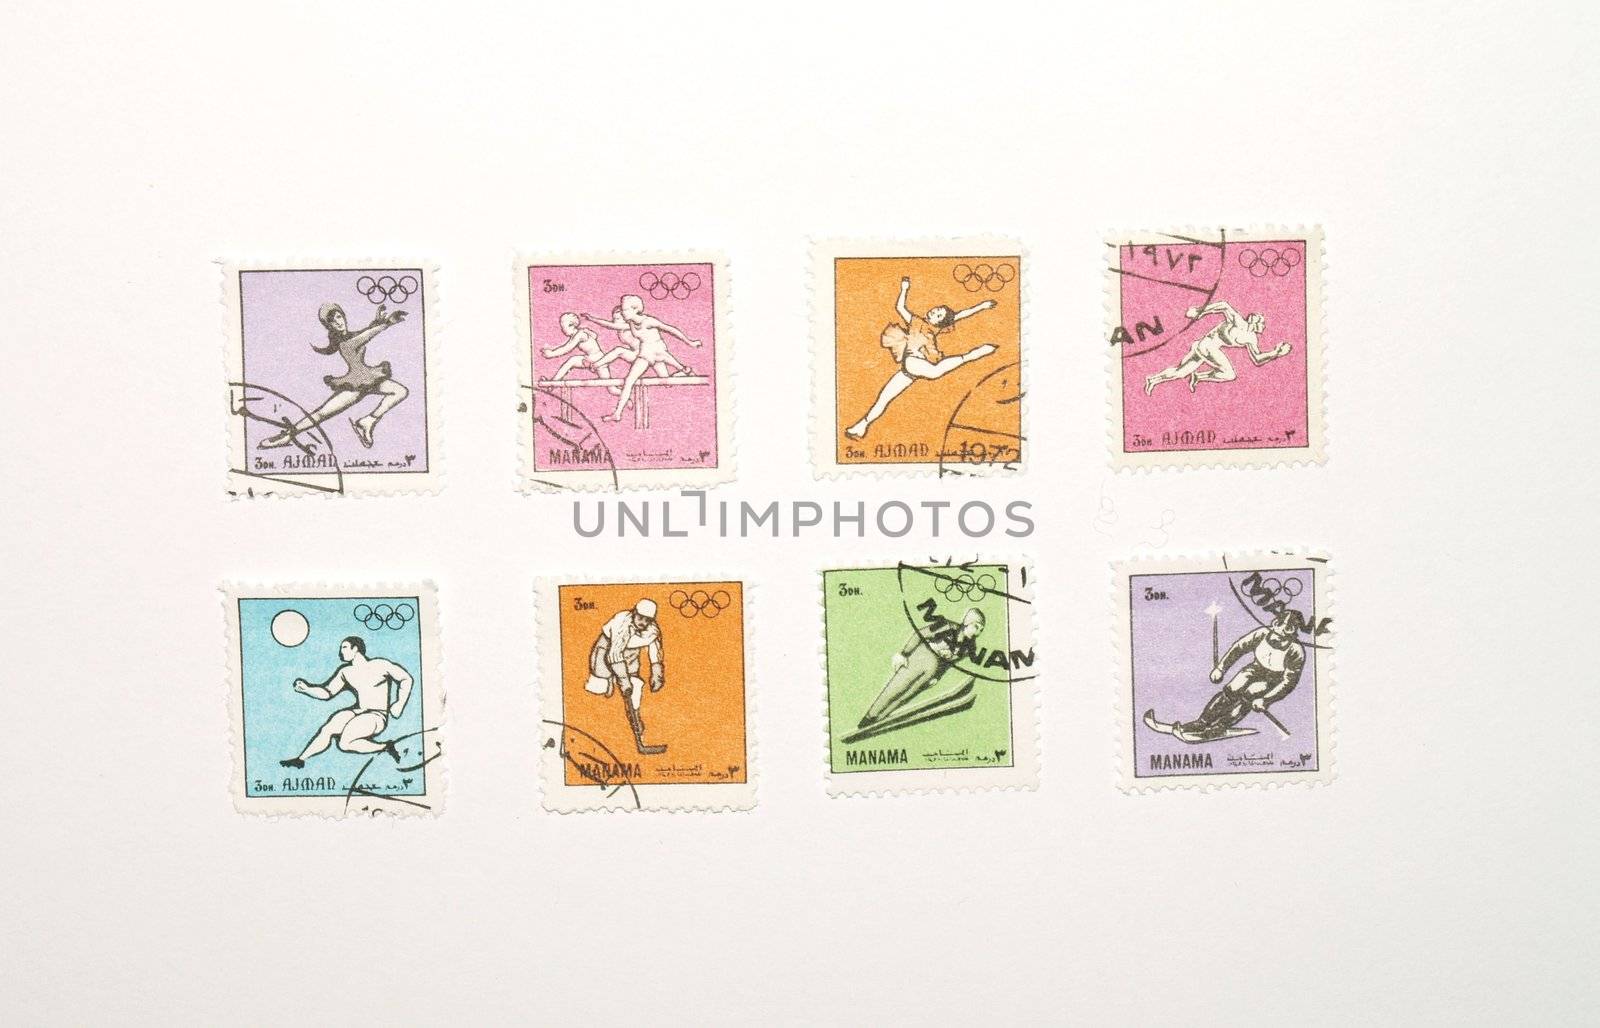 Olympic stamps